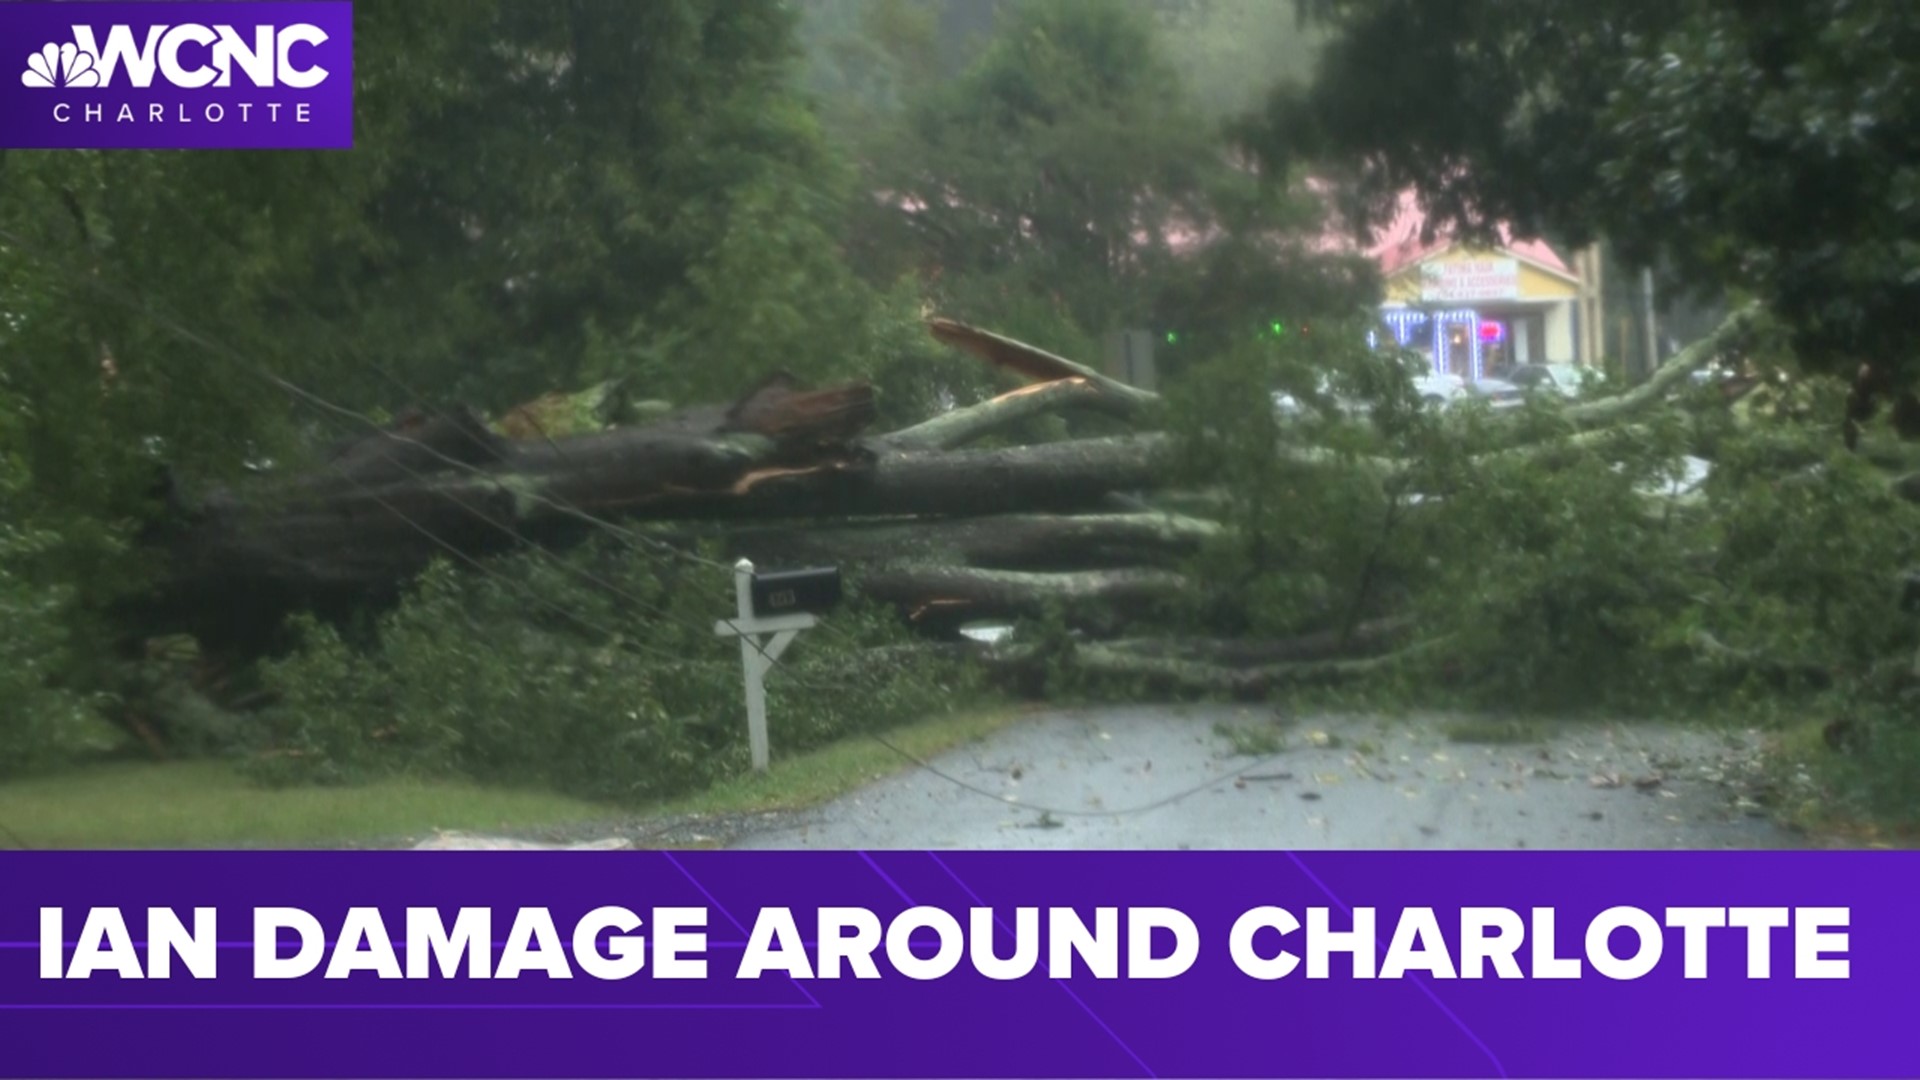 The Charlotte Fire Department responded to 108 storm-related calls. Damages consist of trees on homes, power lines & across roadways.